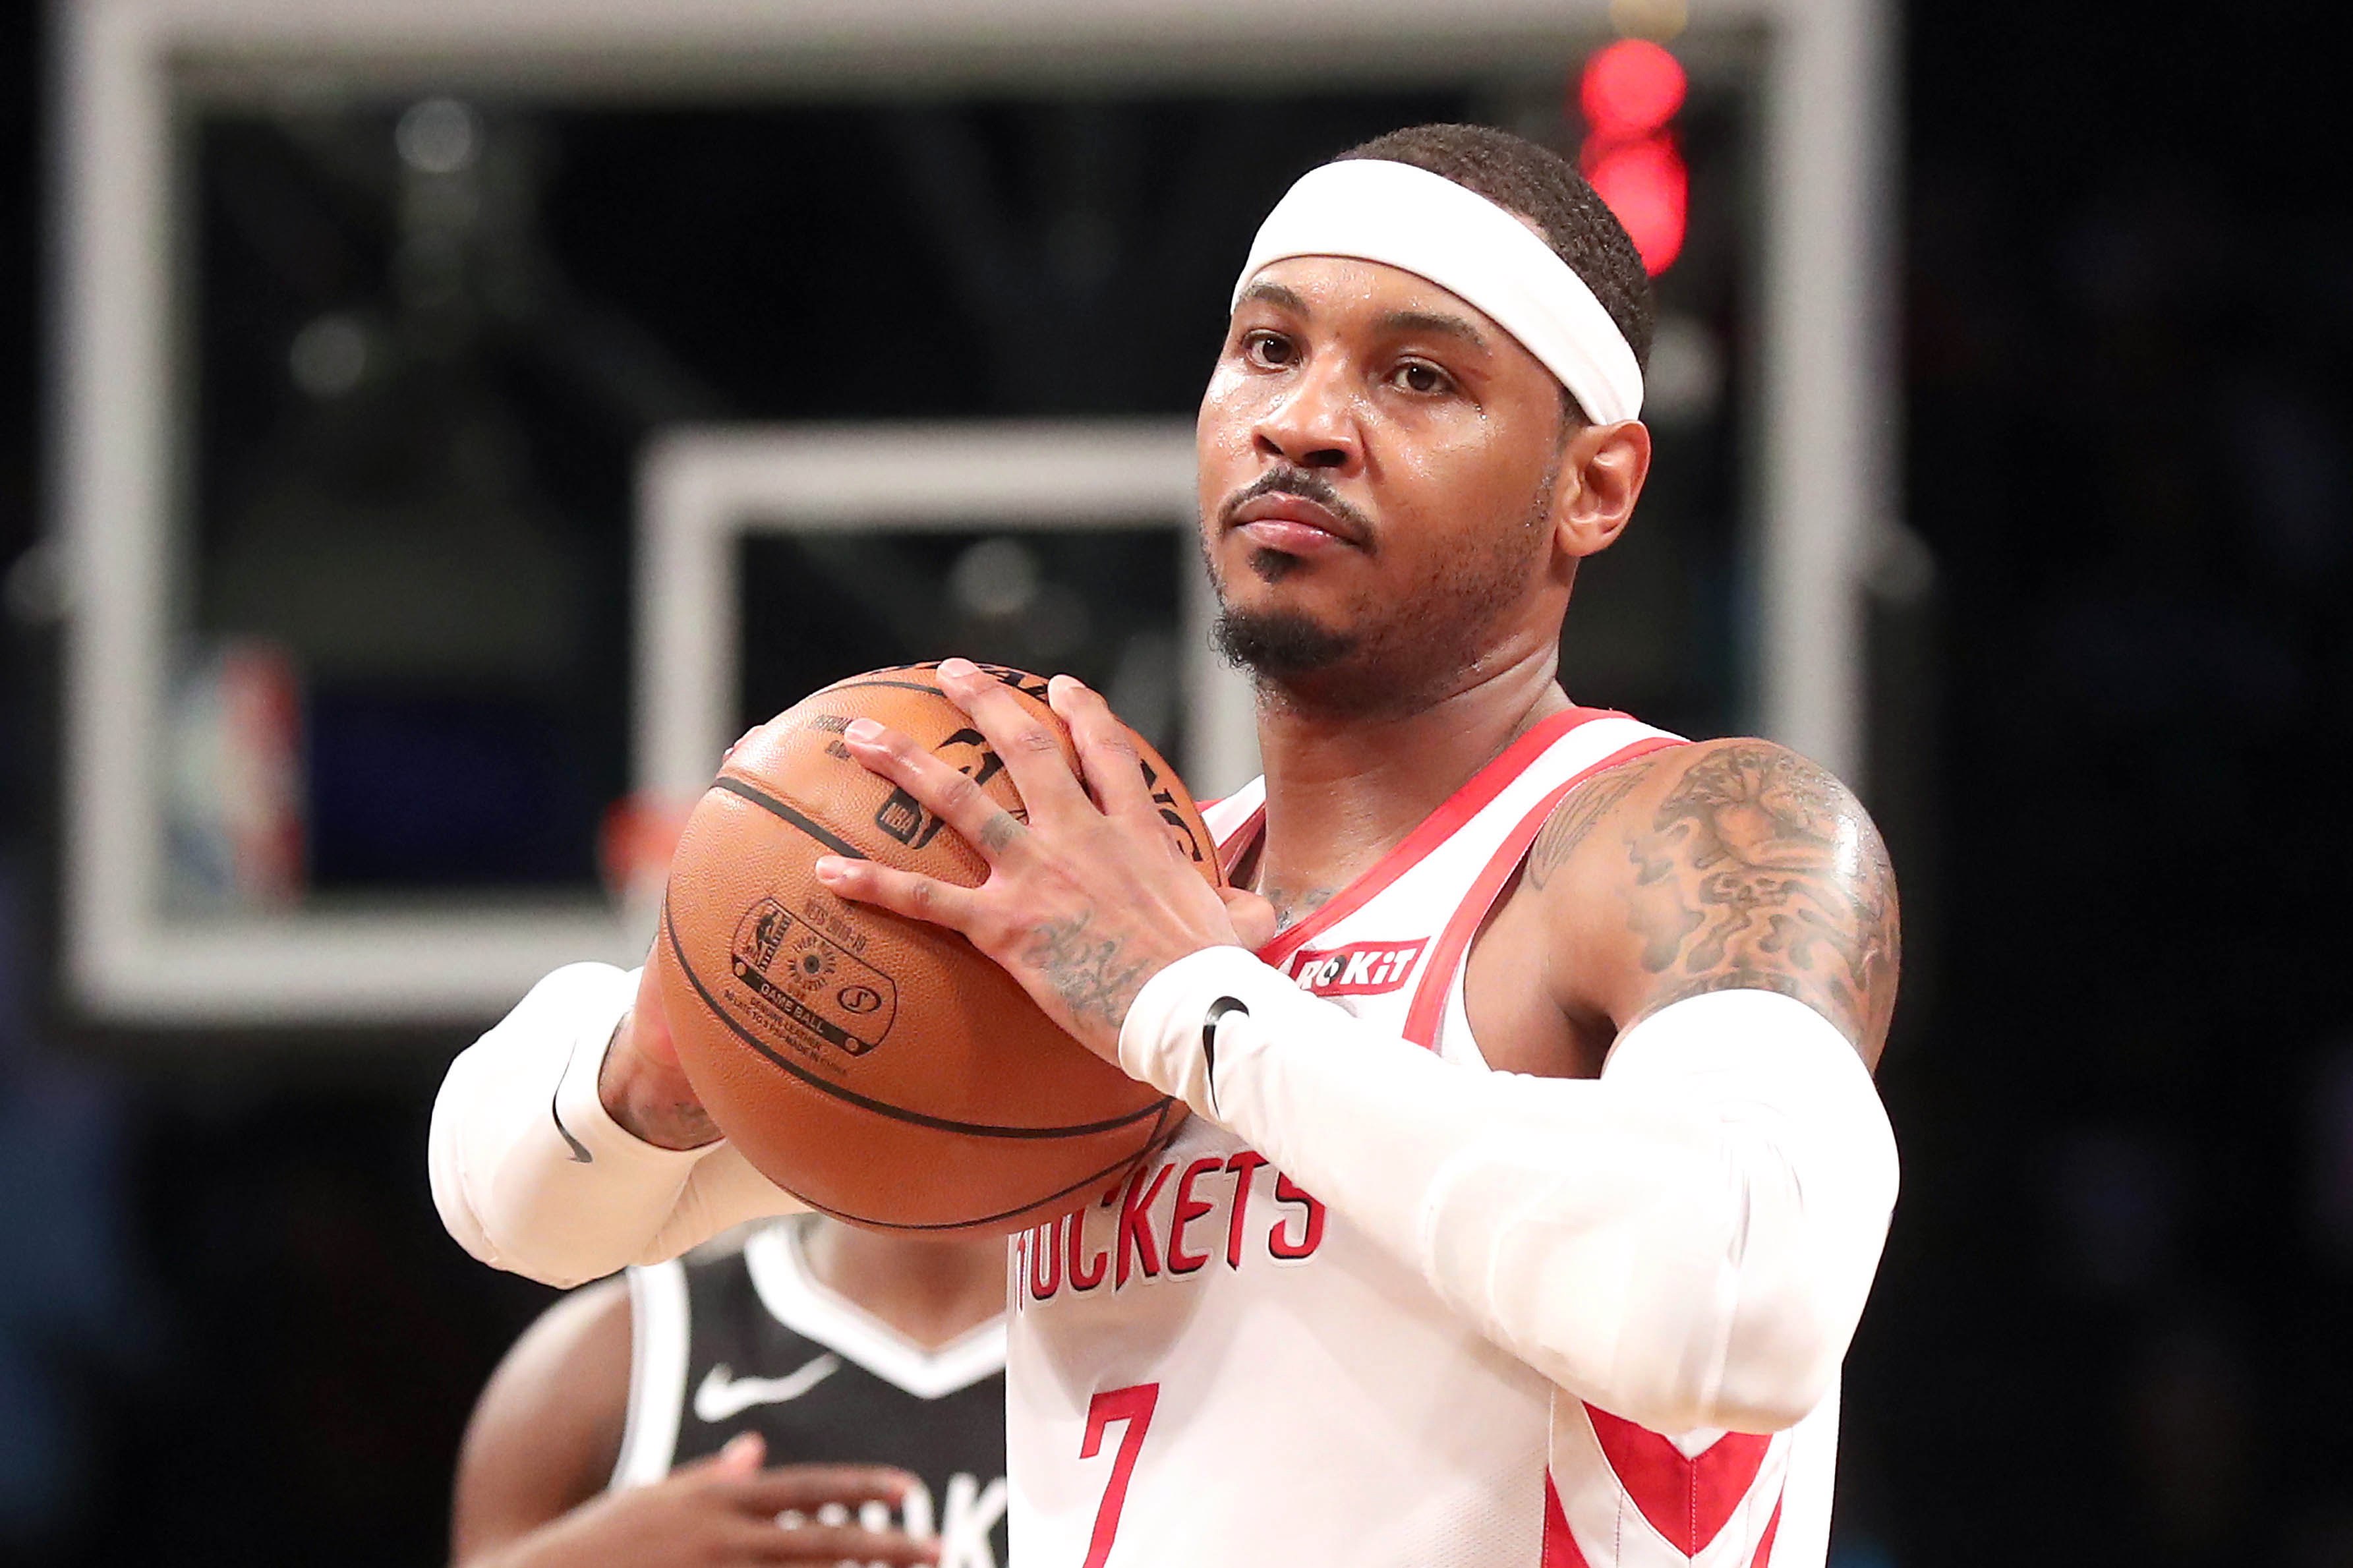 NBA Rumors: Carmelo Anthony New York Knicks Deal in The Works Claims Ex-Knicks Player ...